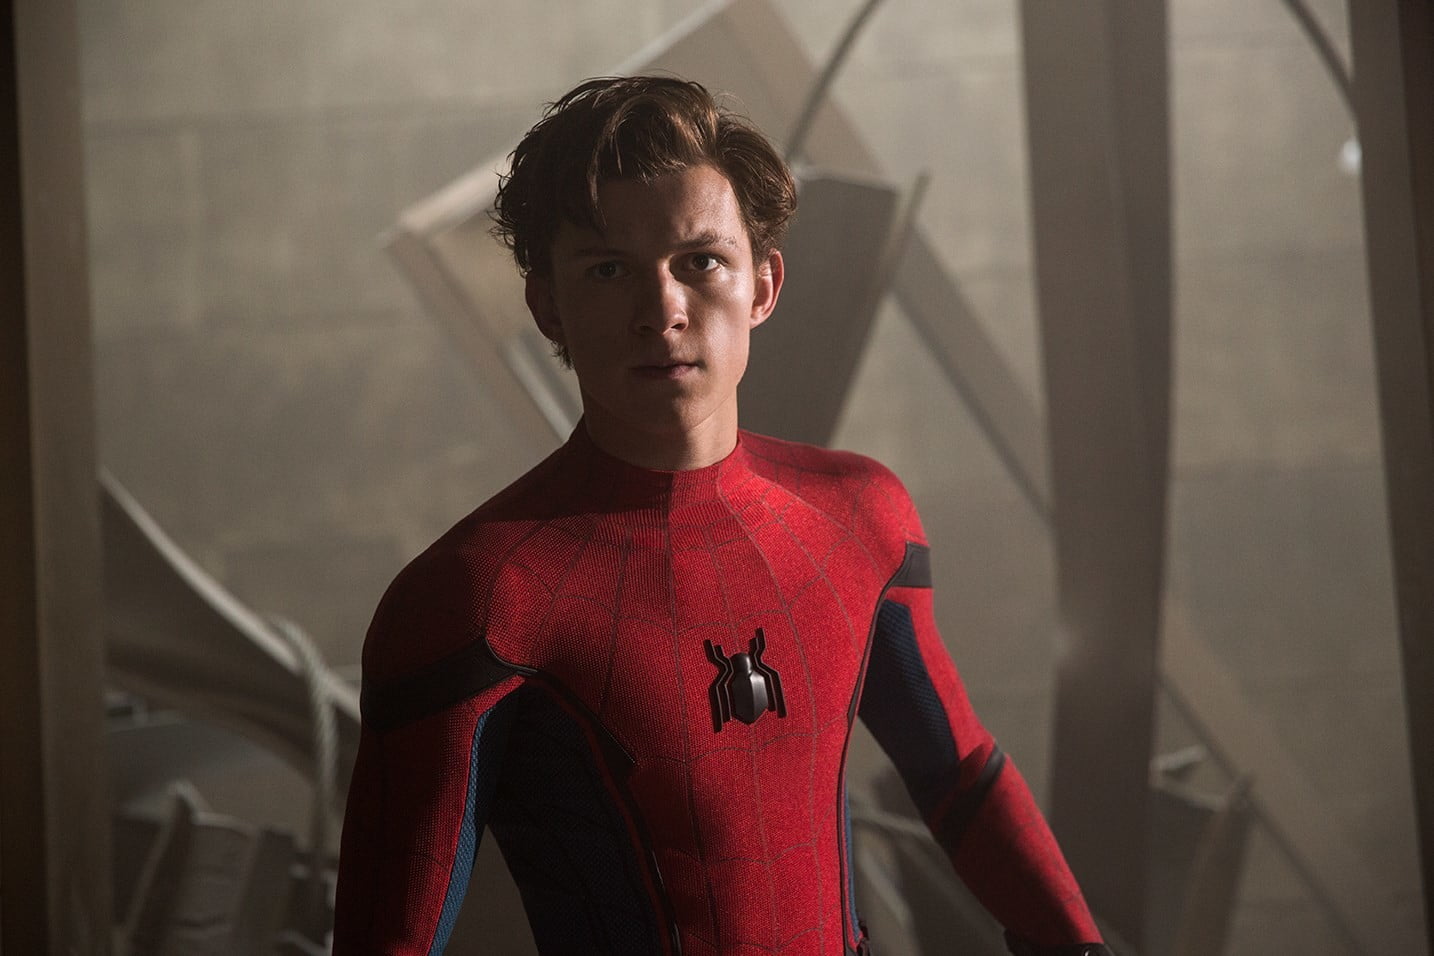 Spider-Man: Far From Home; The Relation Between Tony and Peter